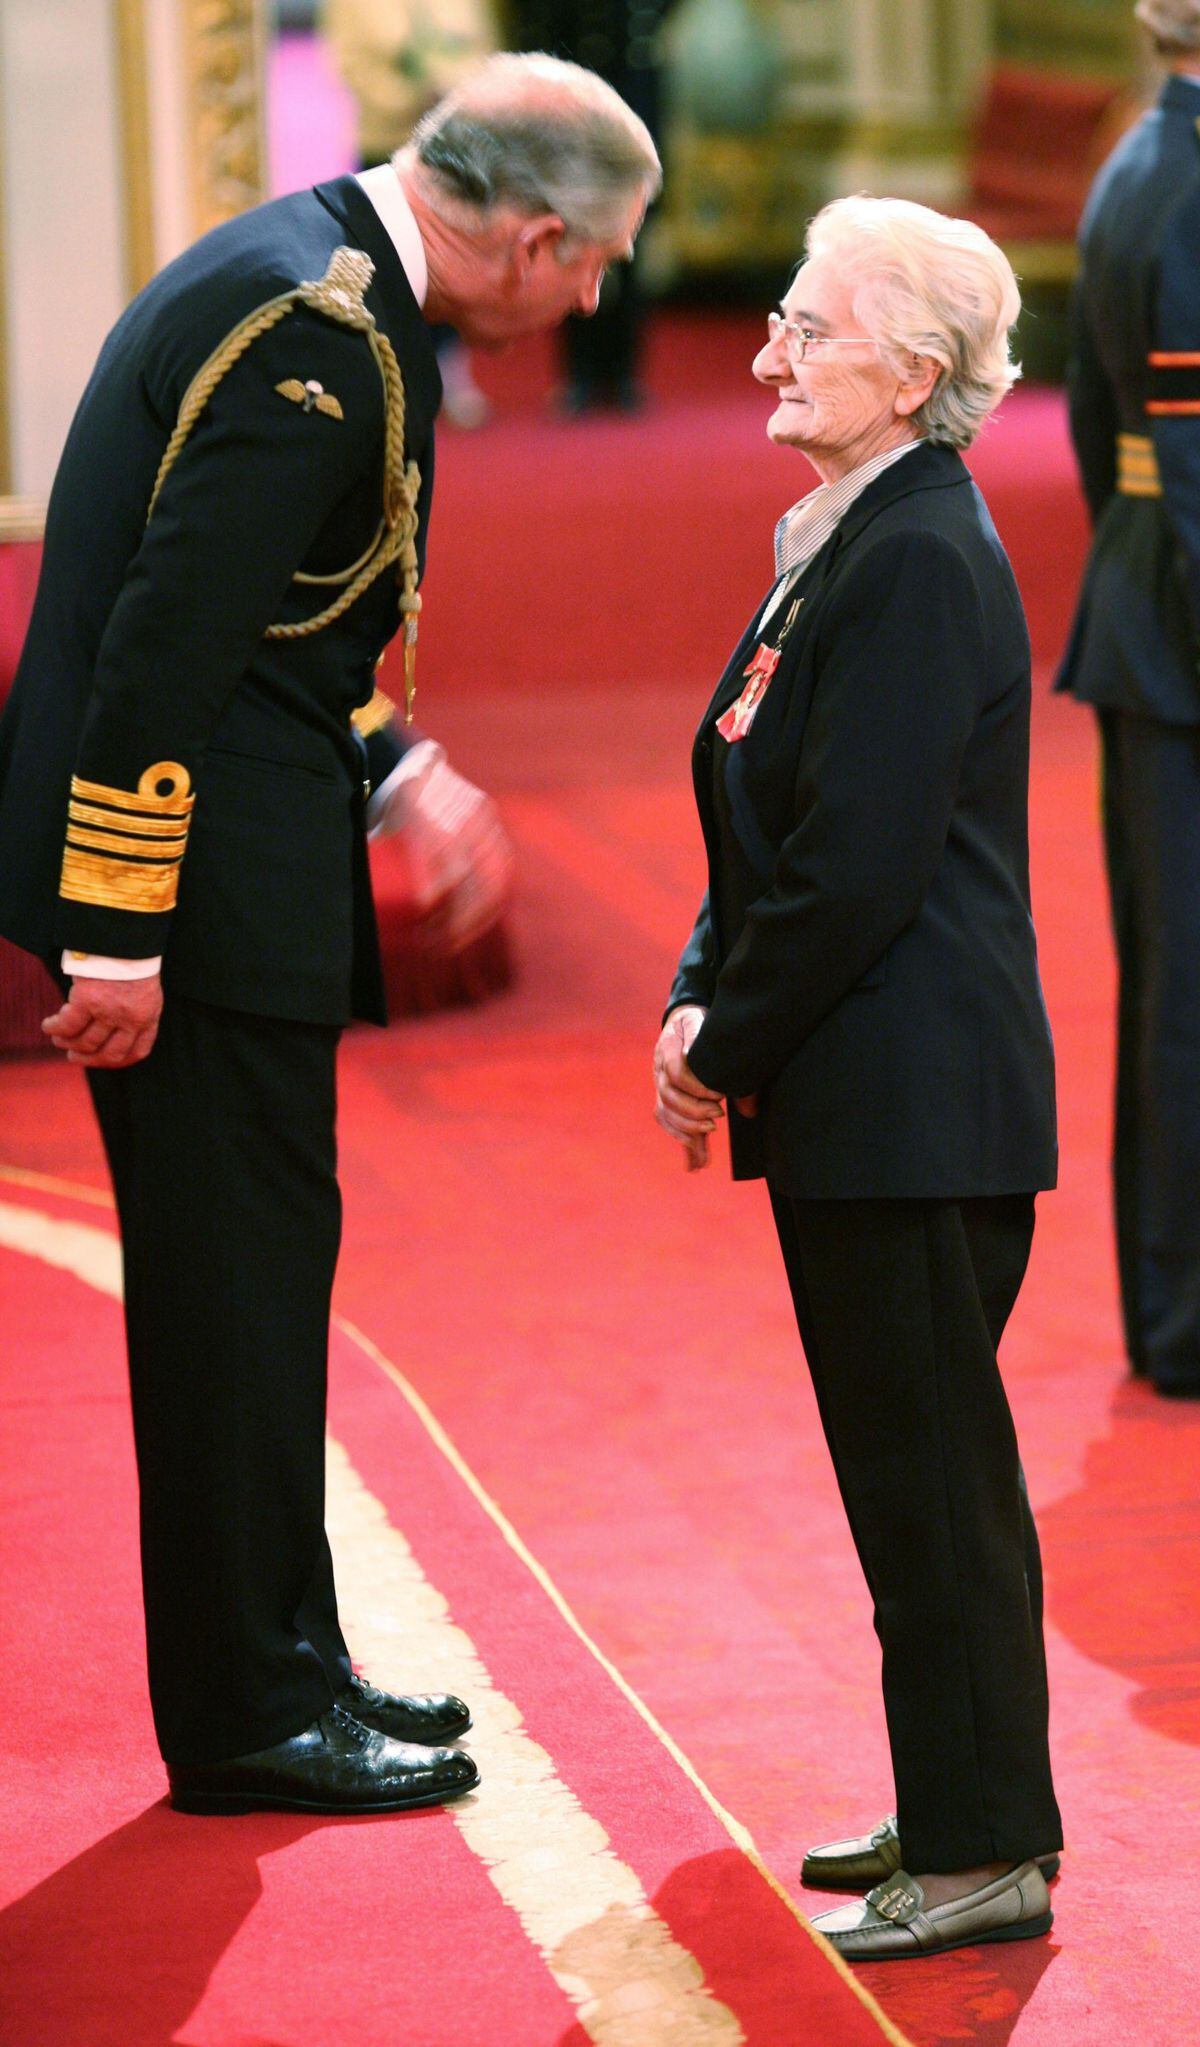 Ann Nightingale at Buckingham Palace receiving her Member of the British Empire (MBE) medal from the Prince of Wales - now King Charles III. Photo: Lewis Whyld/PA Wire.